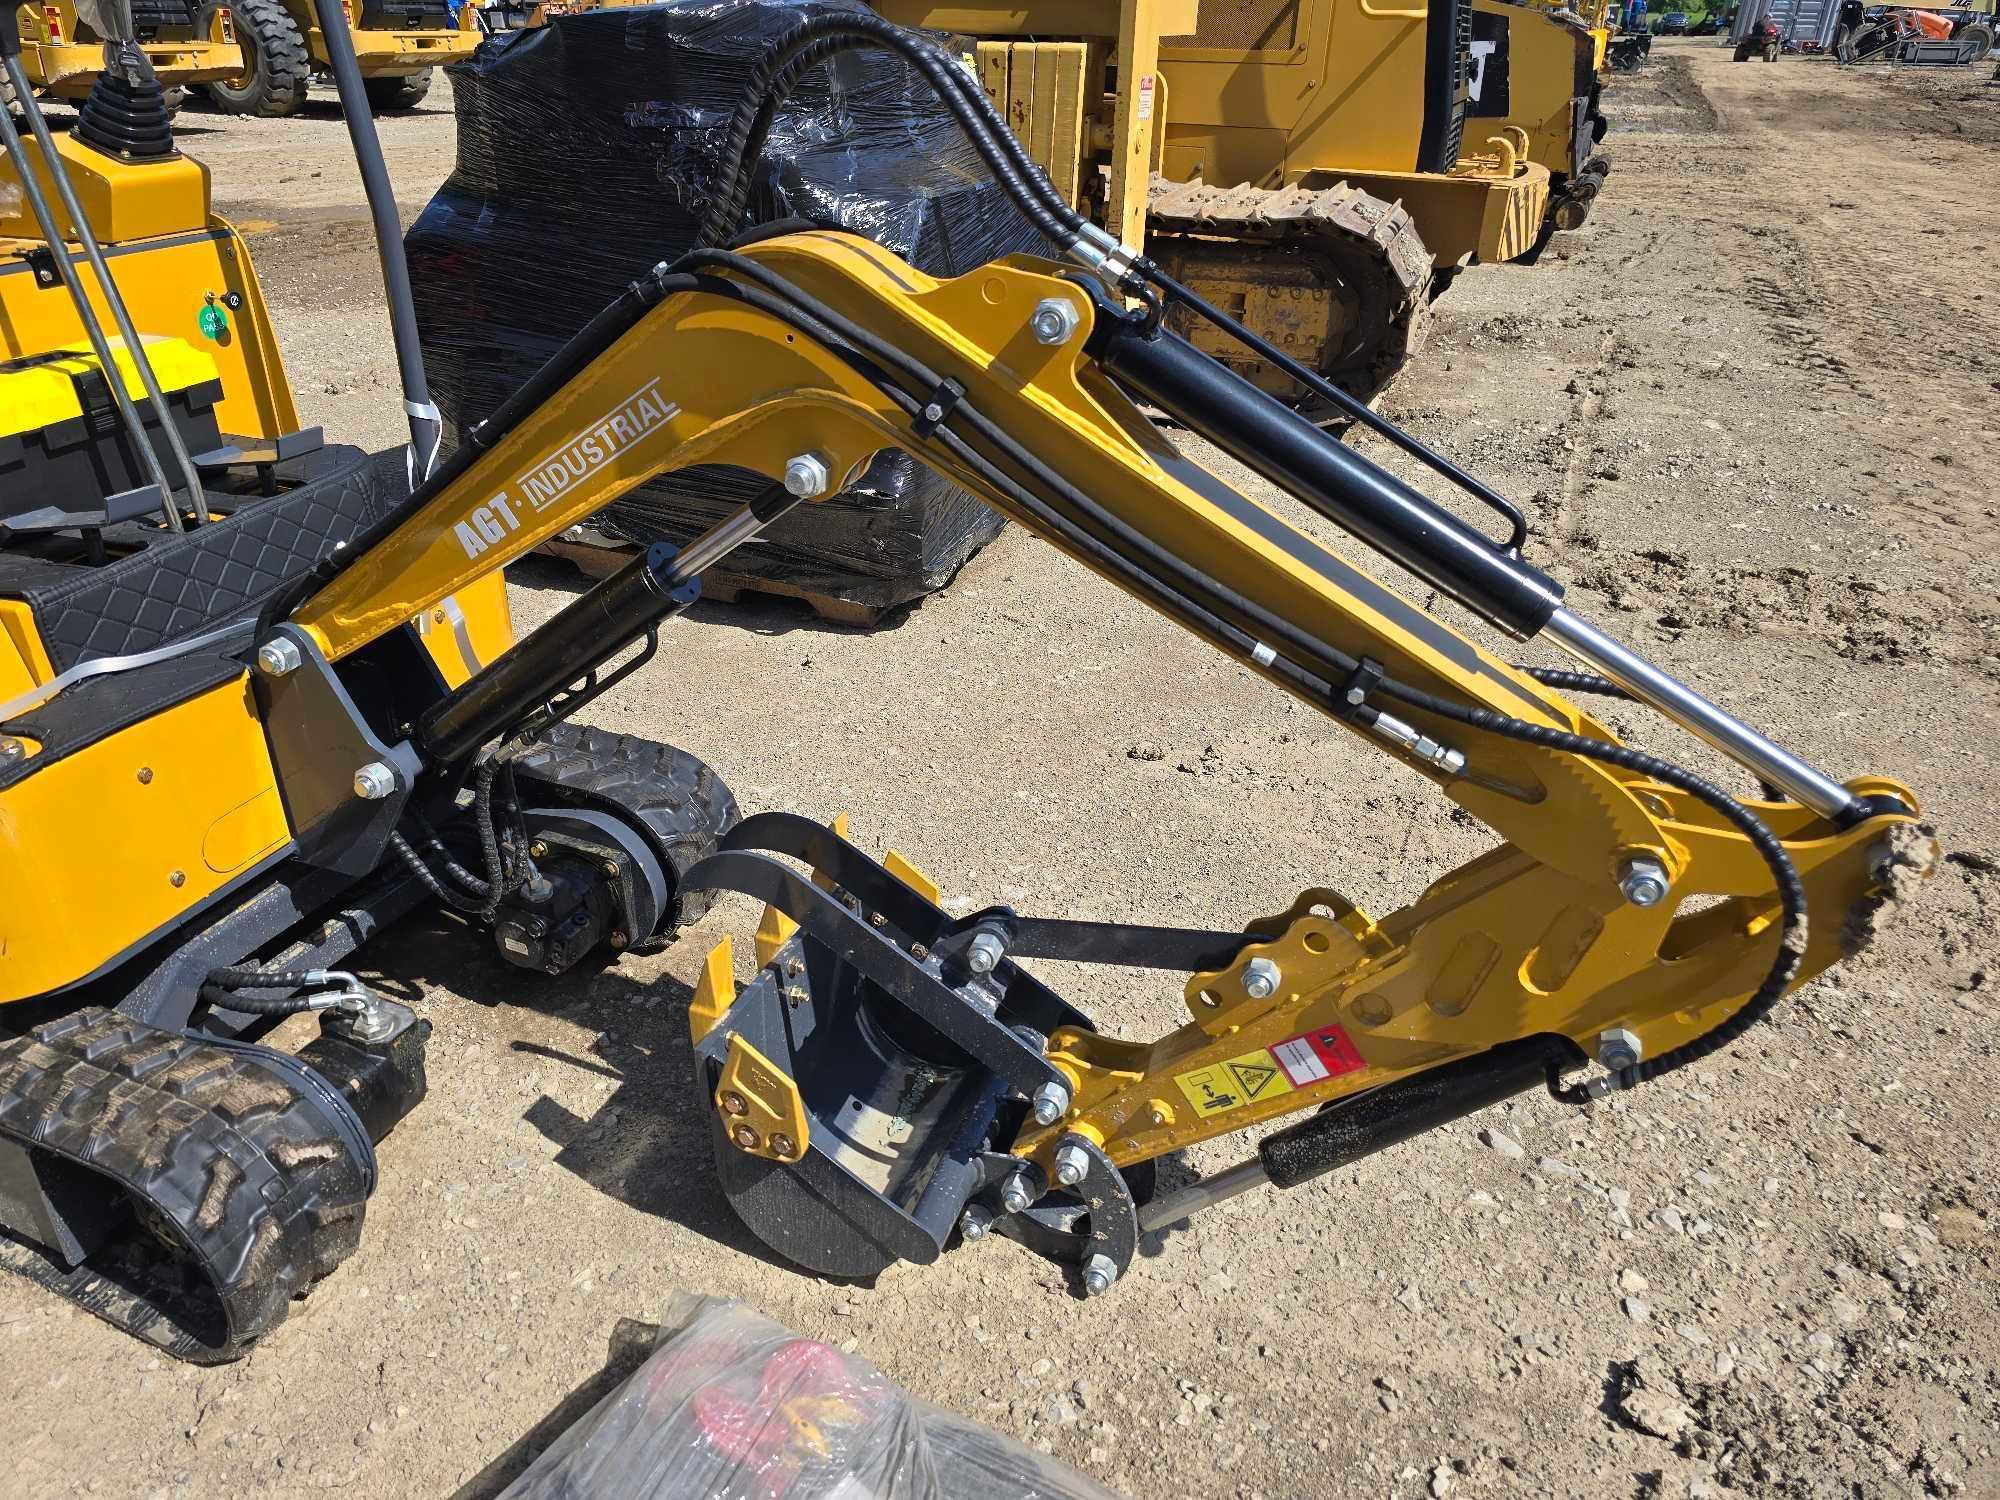 NEW AGT H15 HYDRAULIC EXCAVATOR SN-012139, powered by Briggs & Stratton gas engine, equipped with